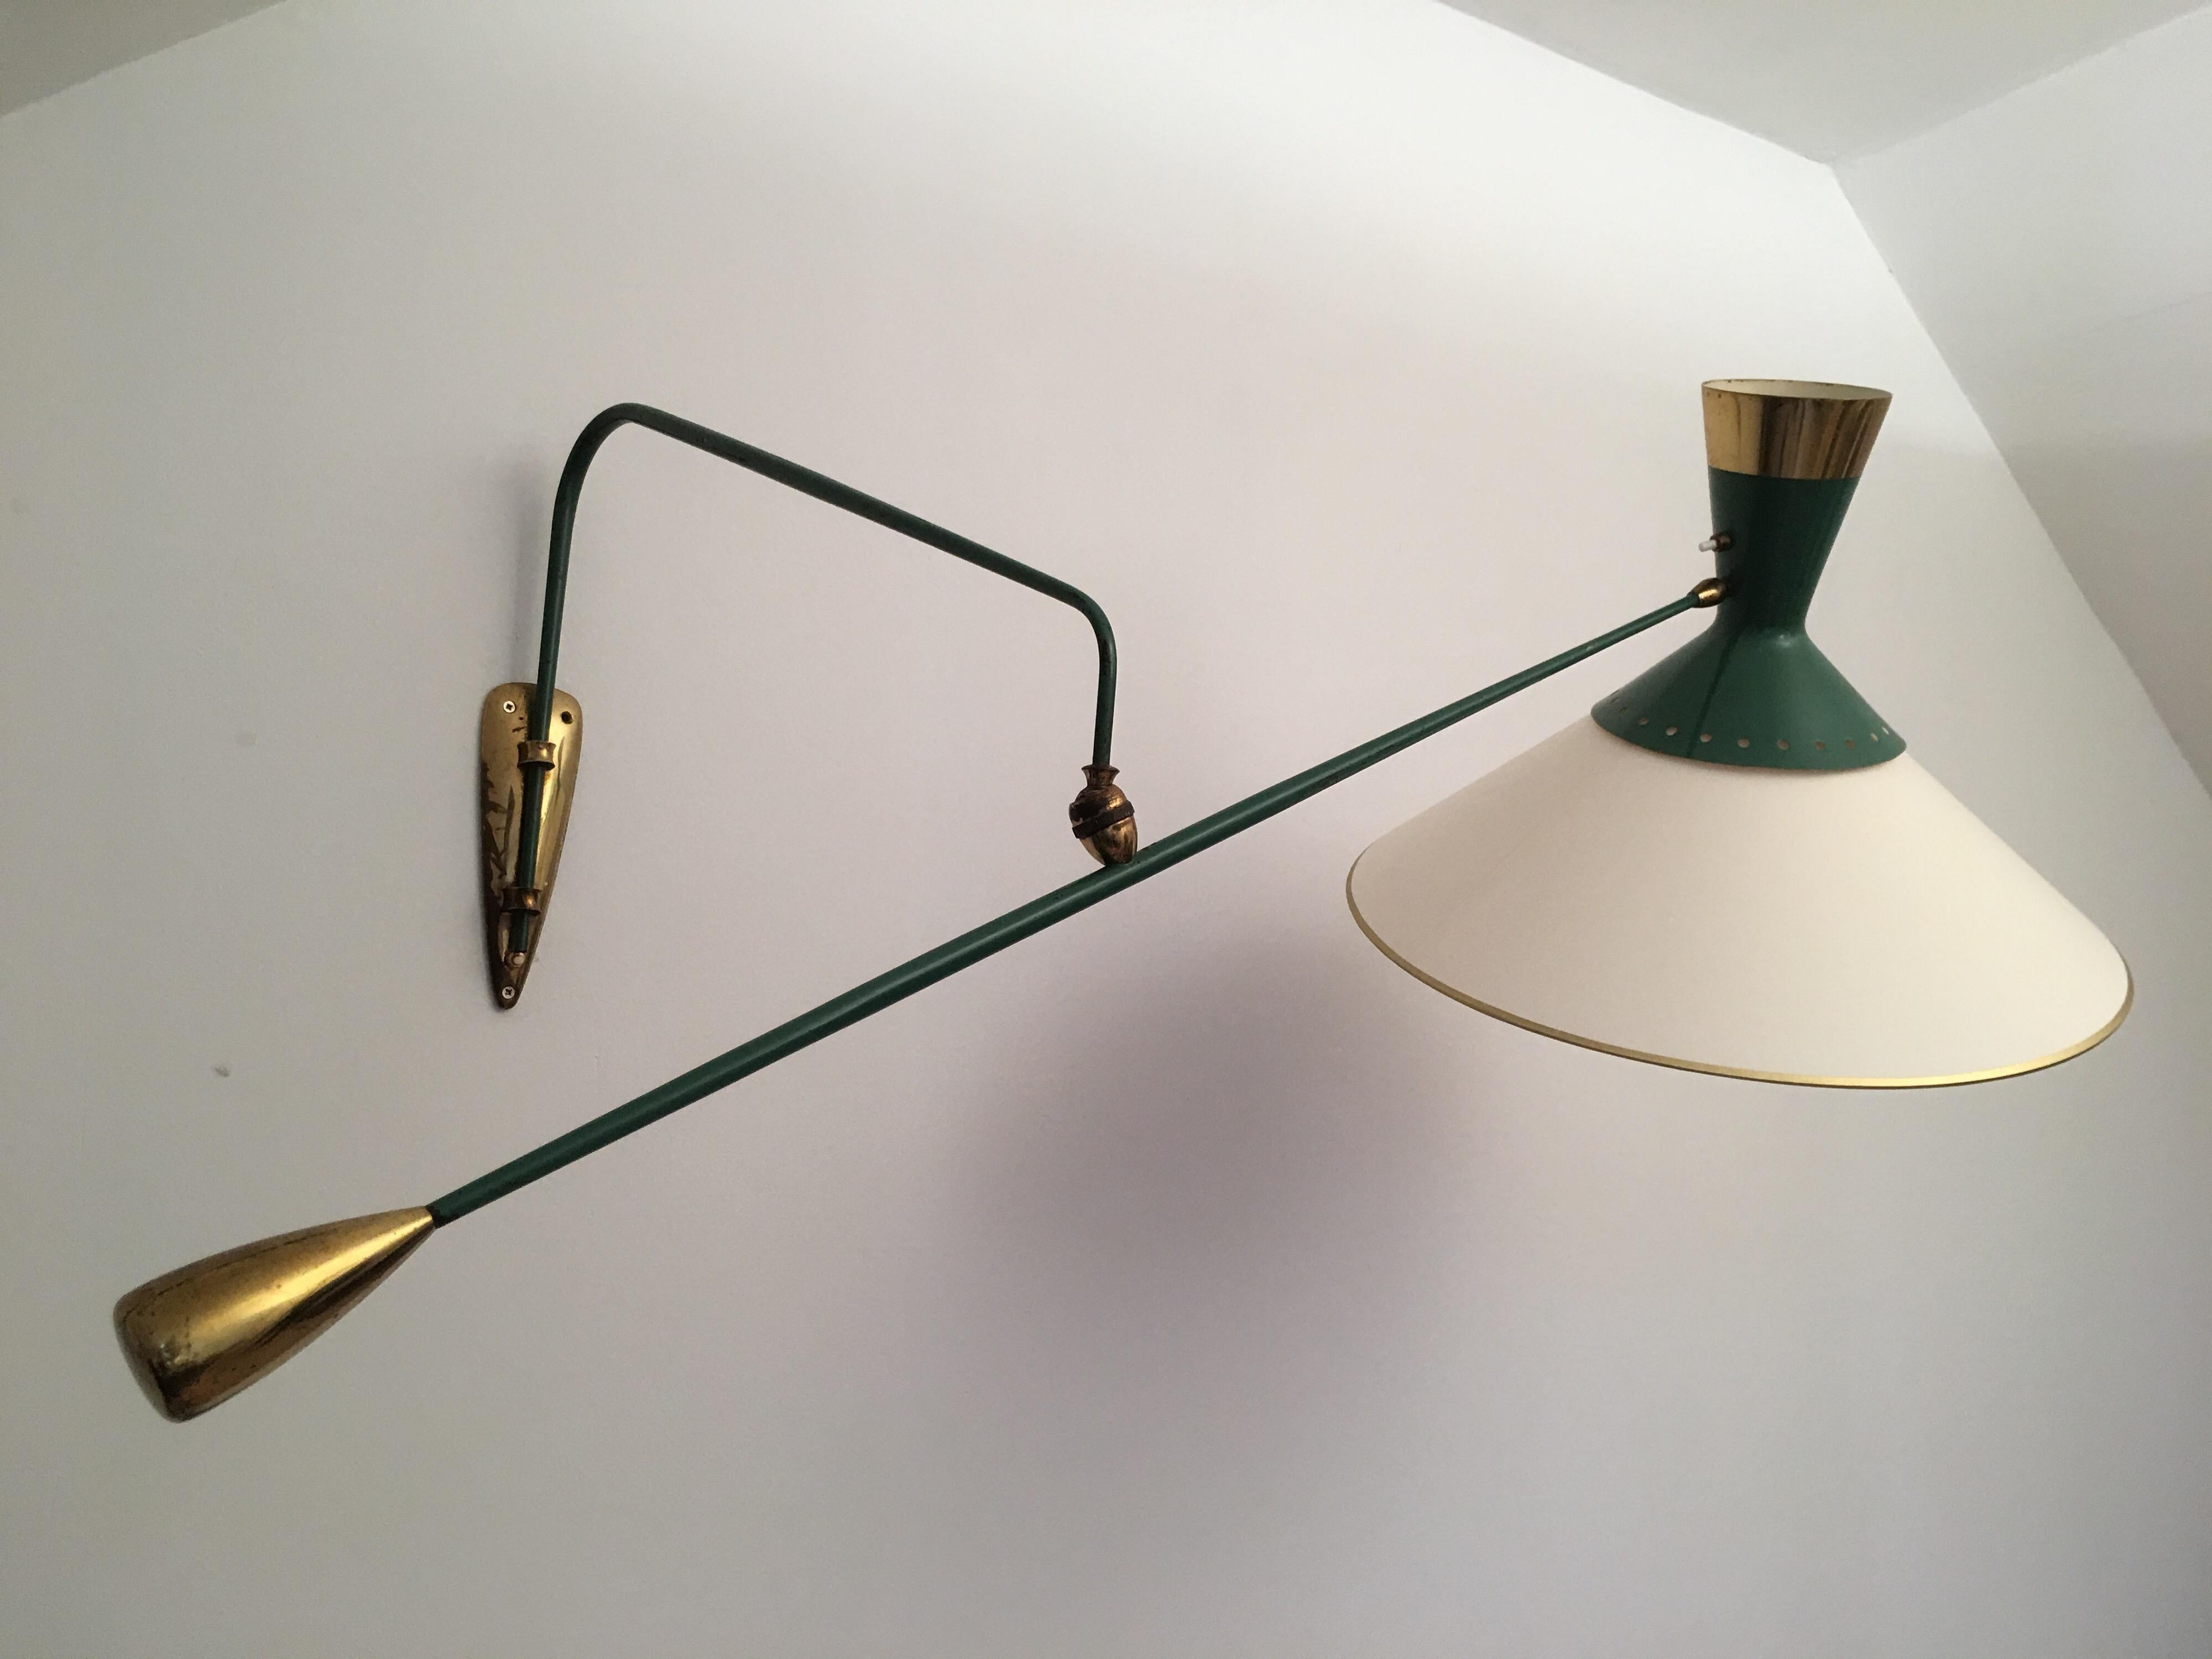 Mid-20th Century Arlus Green and Gilt Counter Balance Swing Arm Wall Lamp, French 1950s For Sale